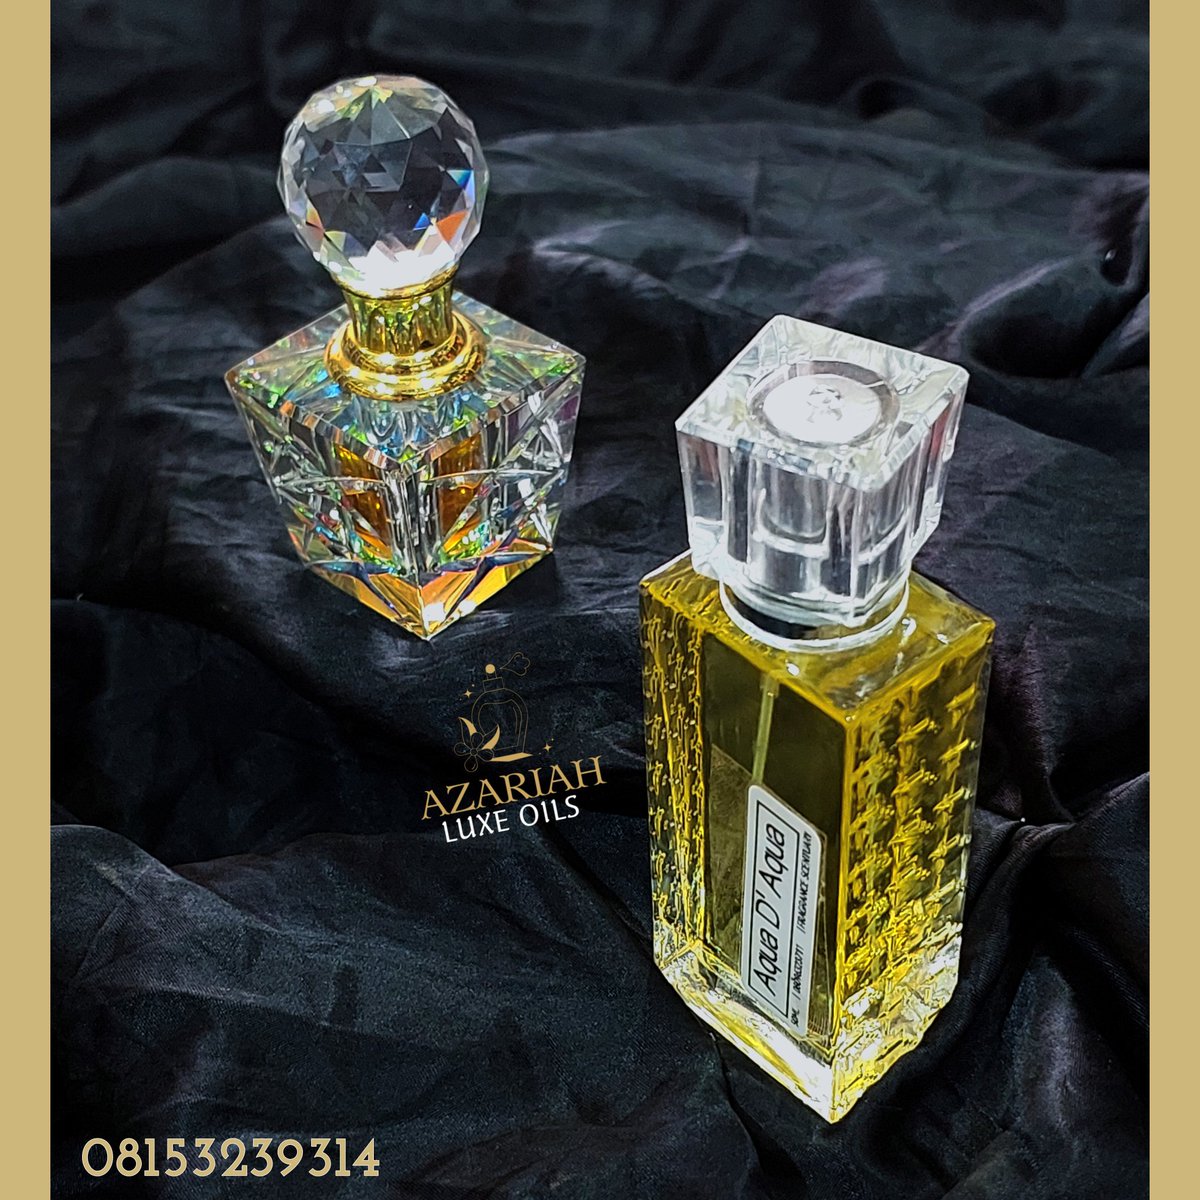 We work with your budget and help you purchase fragrances you'll always love to wear. We have Perfume Oils in wide range of fragrances - oudsy, florals, fruity, citrusy, lactonic, marine, etc. You are sure to get signature scents customised by us as well. Send us a DM today ☺️